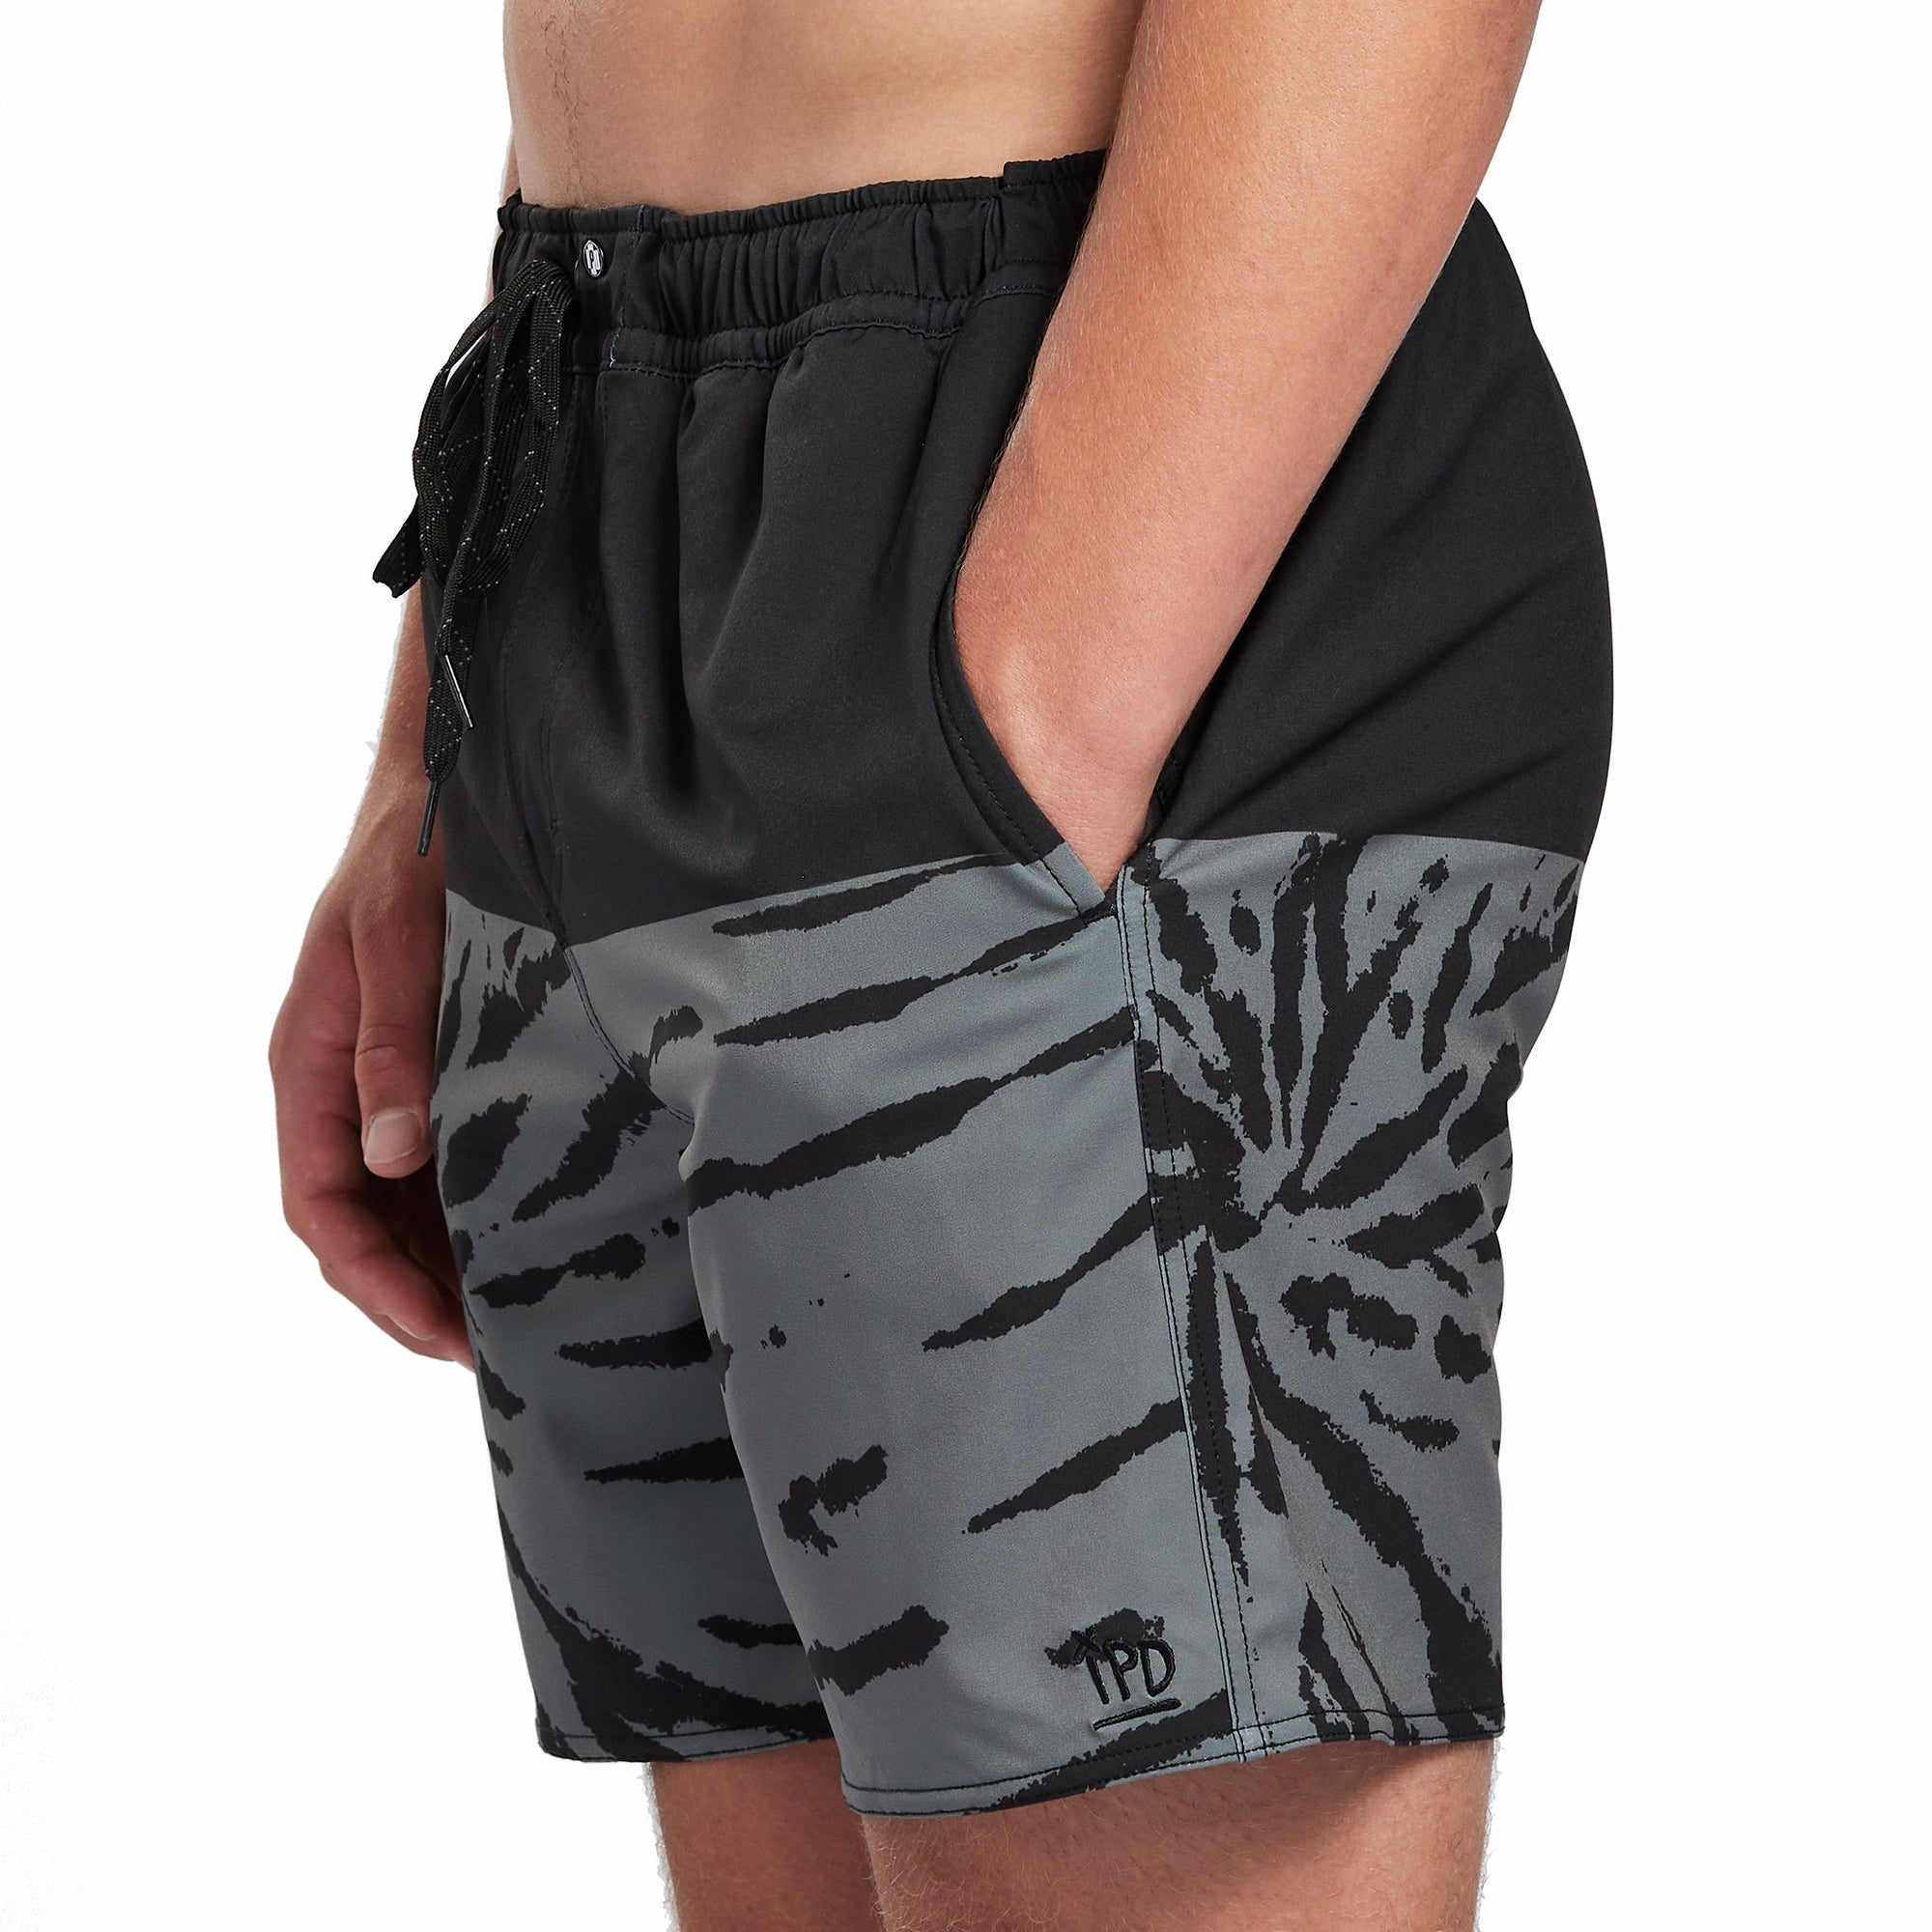 Black boardshorts with a gray swirl pattern front view.